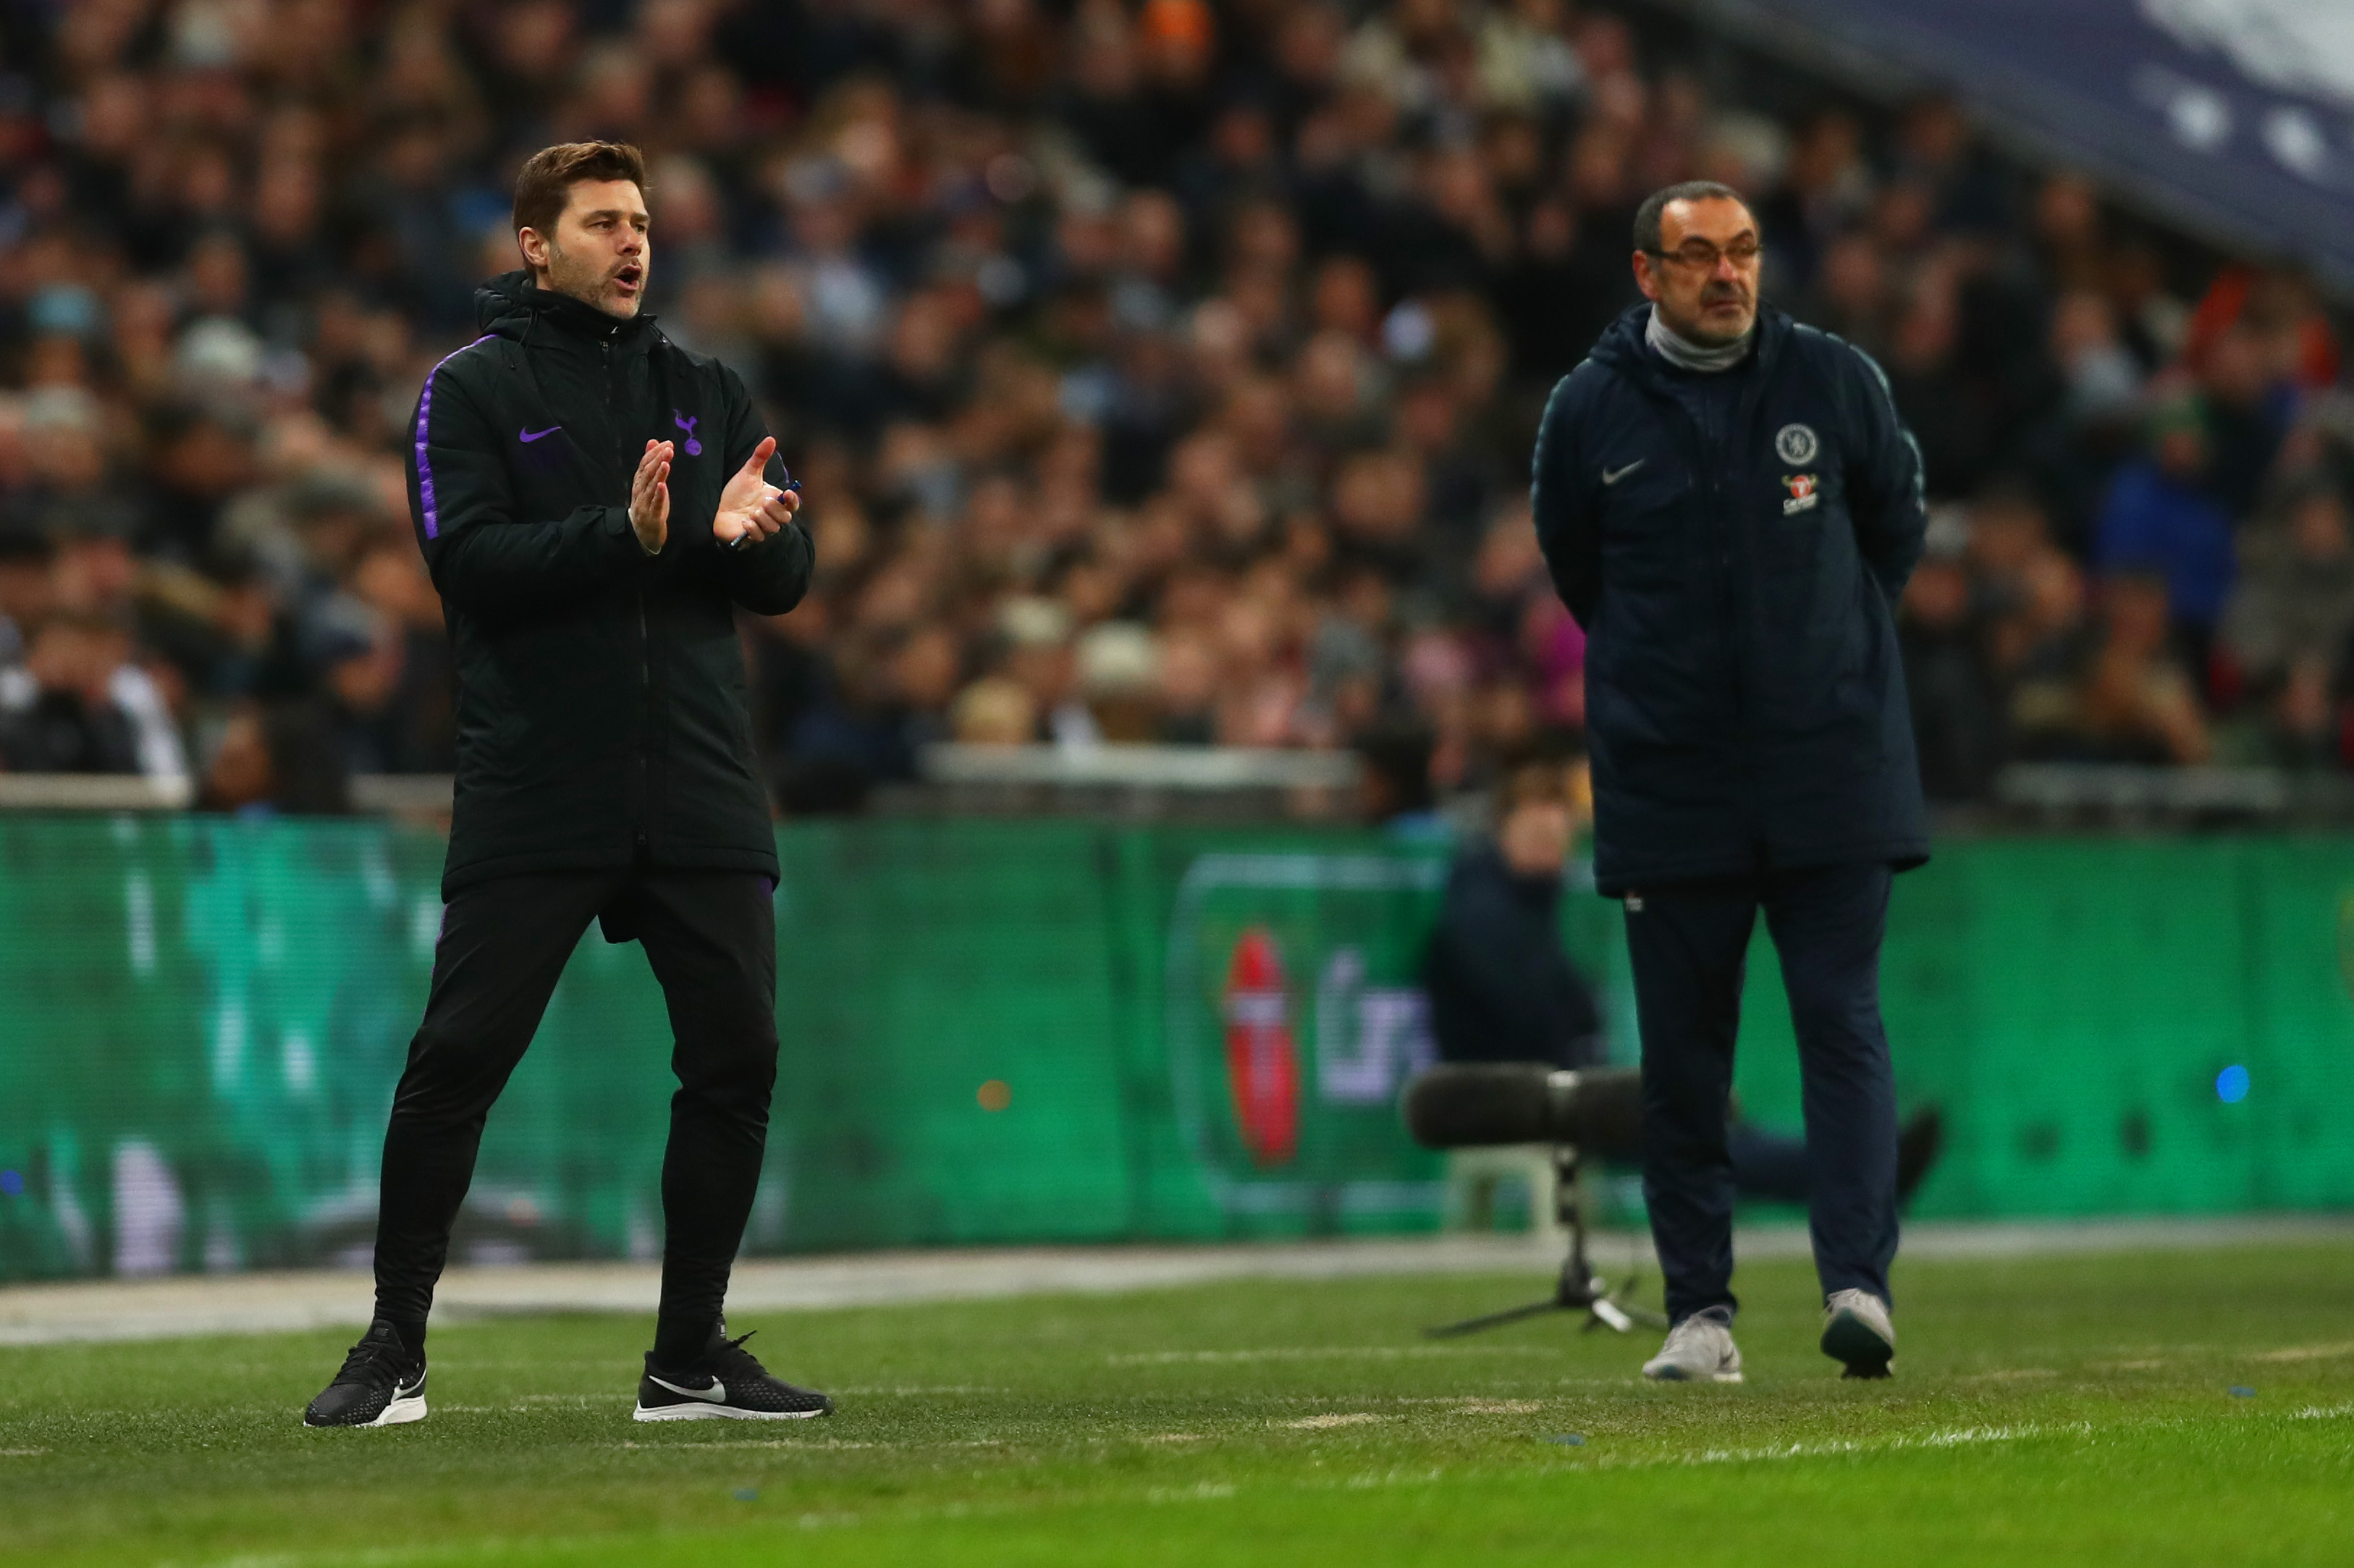 LONDON, ENGLAND - JANUARY 08: Mauricio Pochettino, Manager of Tottenham Hotspur gives his team instructions as Maurizio Sarri, Manager of Chelsea looks on during the Carabao Cup Semi-Final First Leg match between Tottenham Hotspur and Chelsea at Wembley Stadium on January 8, 2019 in London, England.  (Photo by Clive Rose/Getty Images)